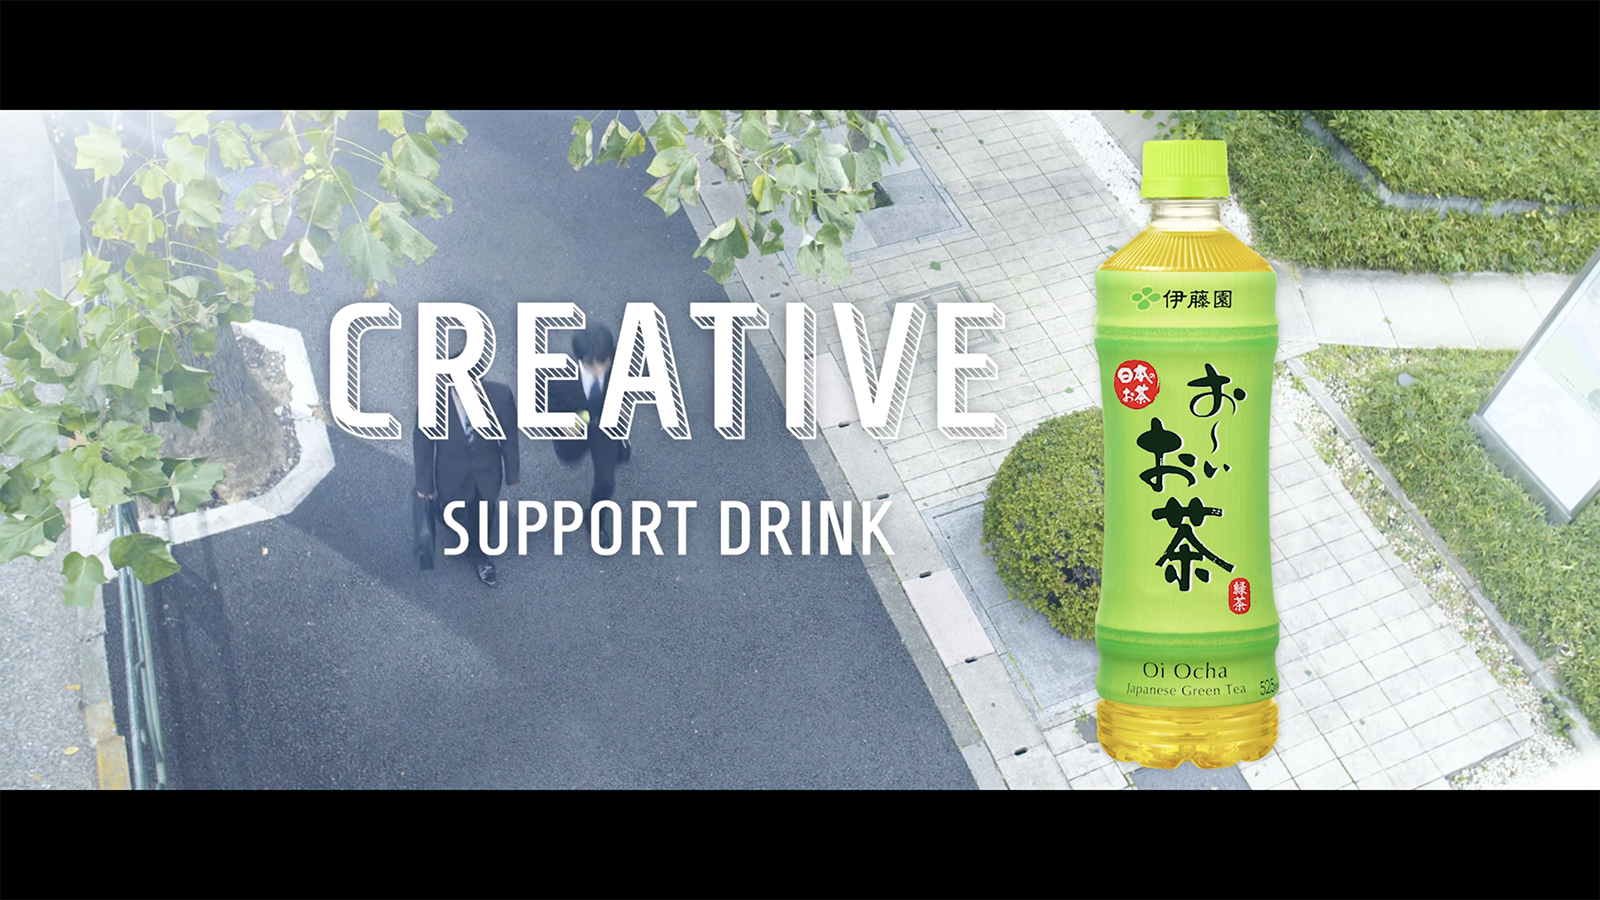 CREATIVE SUPPORT DRINK